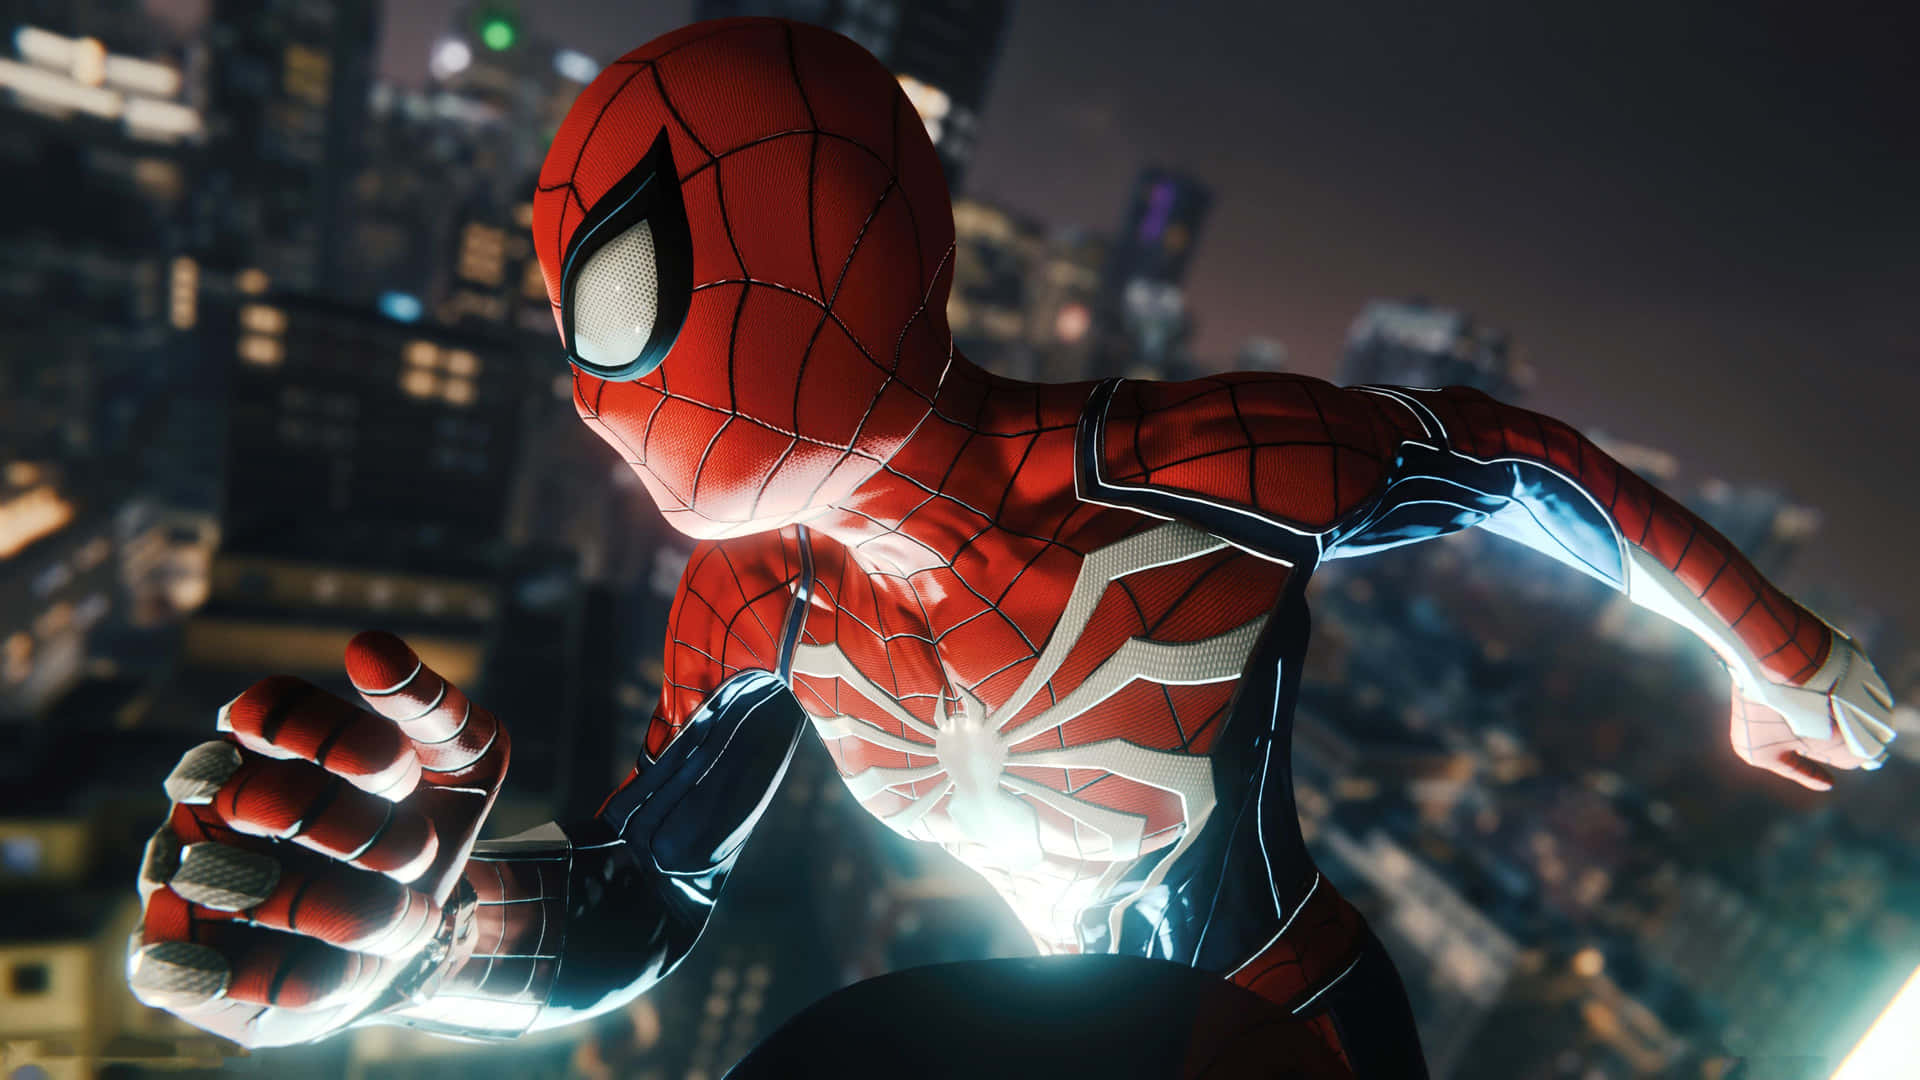 Spider Man Ps4 4k City Night Action Photography Wallpaper